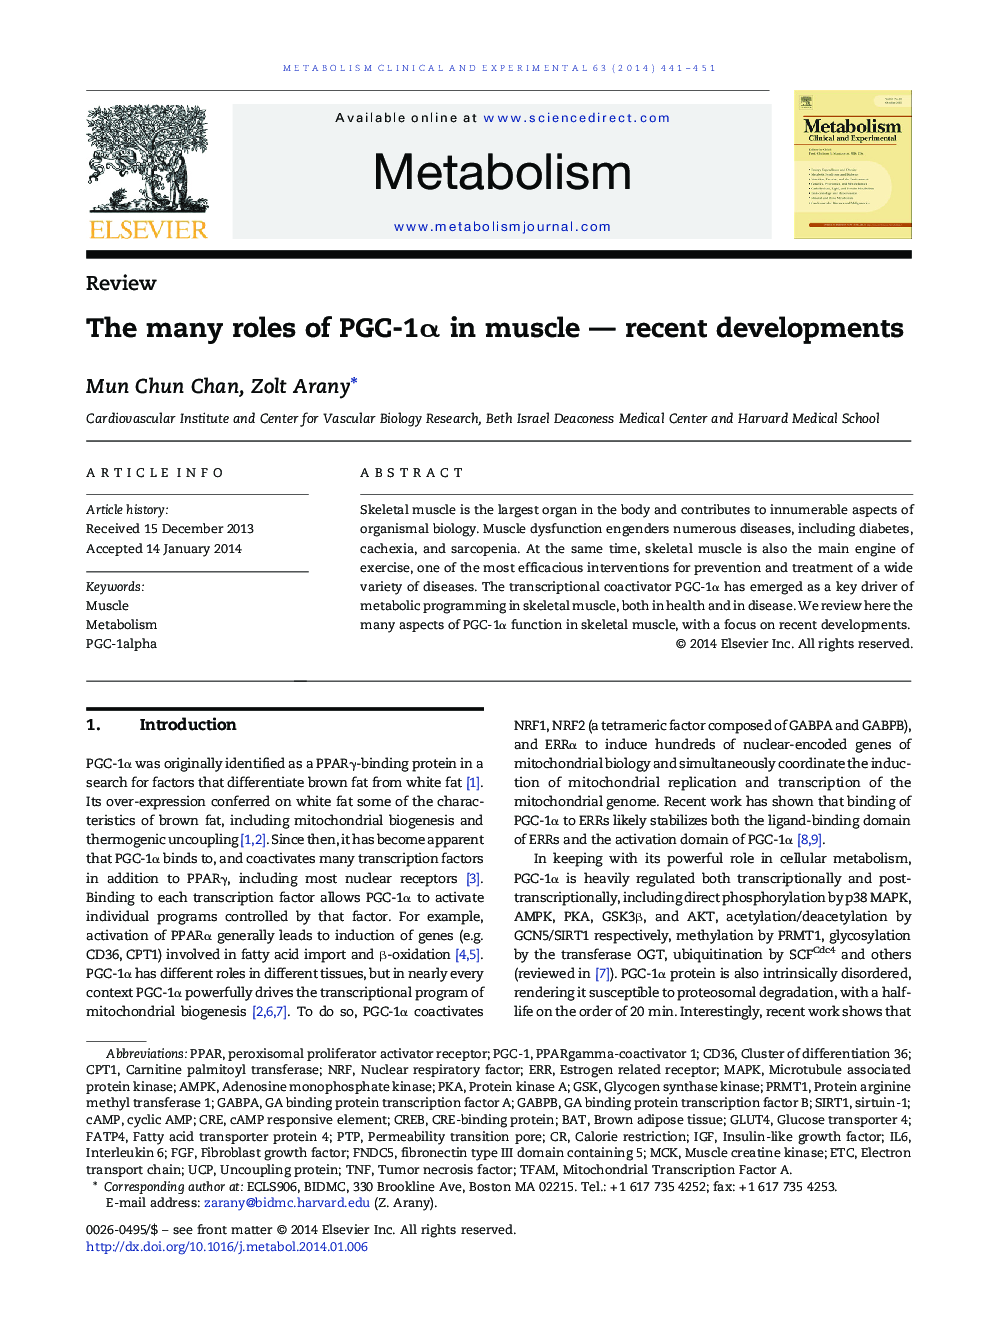 ReviewThe many roles of PGC-1Î± in muscle - recent developments